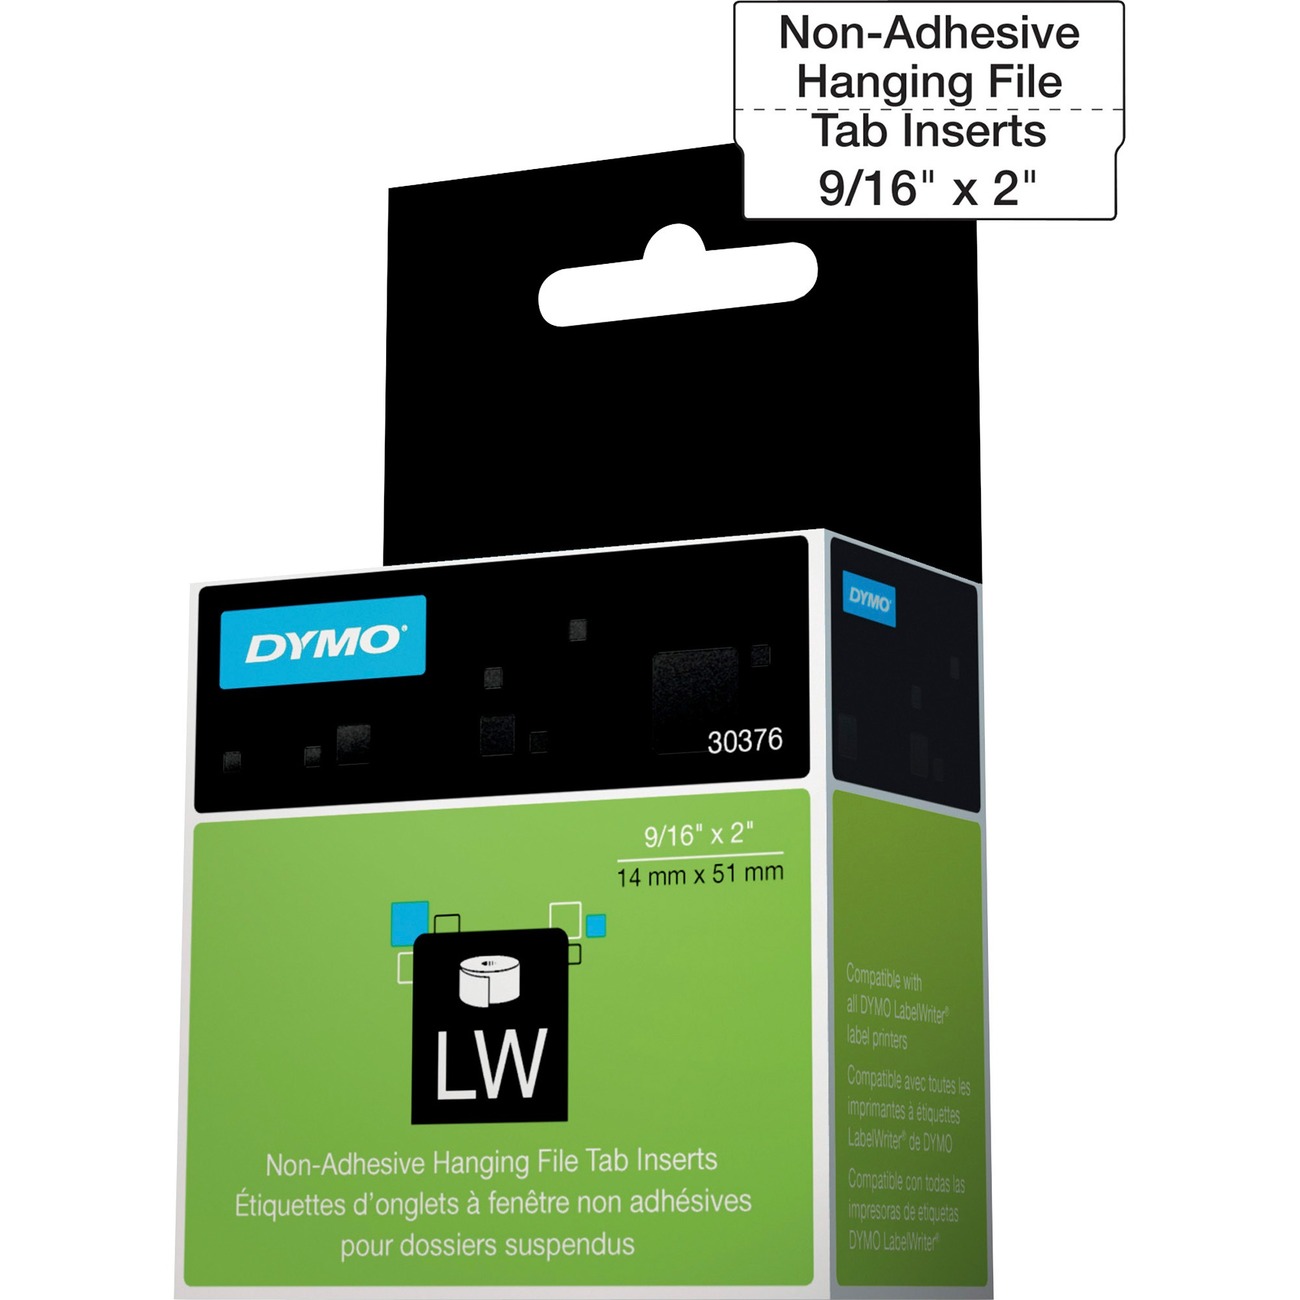 Dymo Hanging File Tabe Inserts